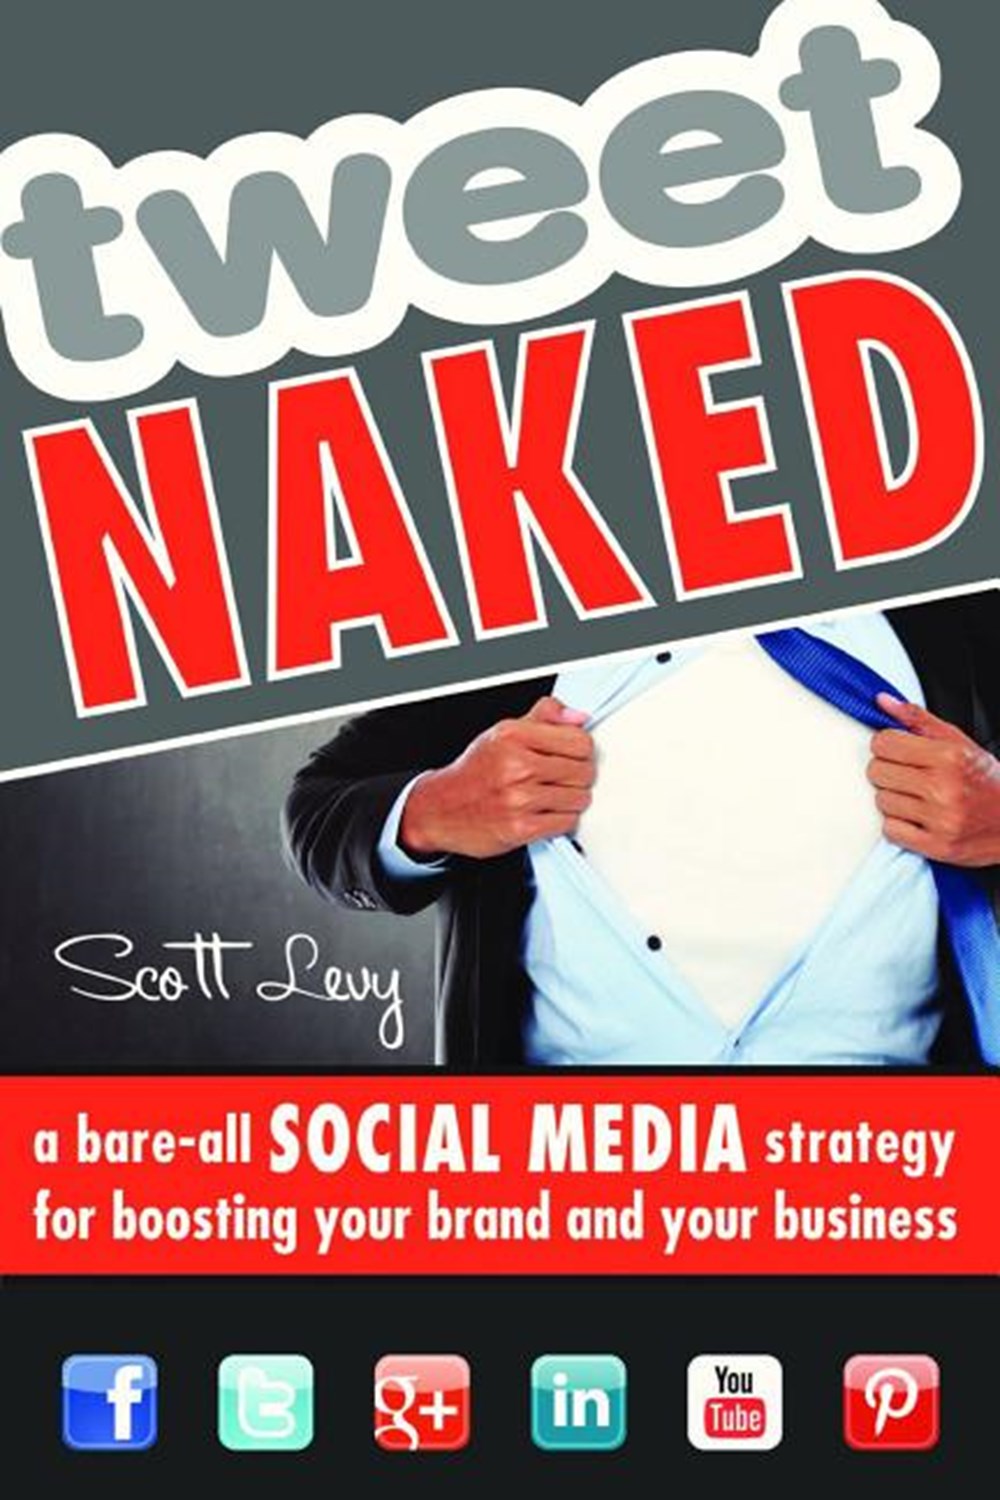 Tweet Naked A Bare-All Social Media Strategy for Boosting Your Brand and Your Business